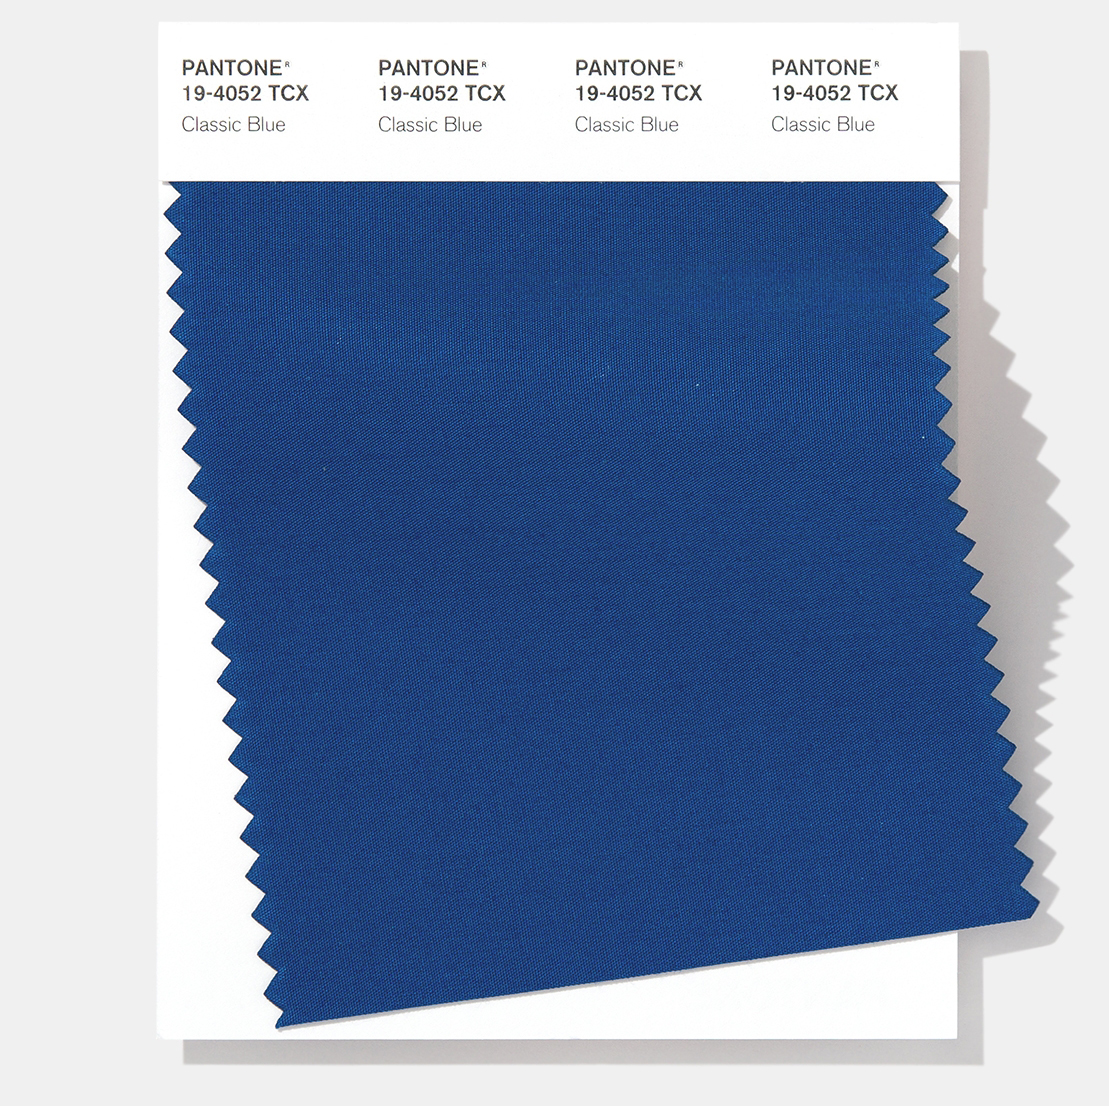 swcd-pantone-fashion-home-interiors-tcx-cotton-swatch-color-of-the-year-2020-classic-blue-19-4052